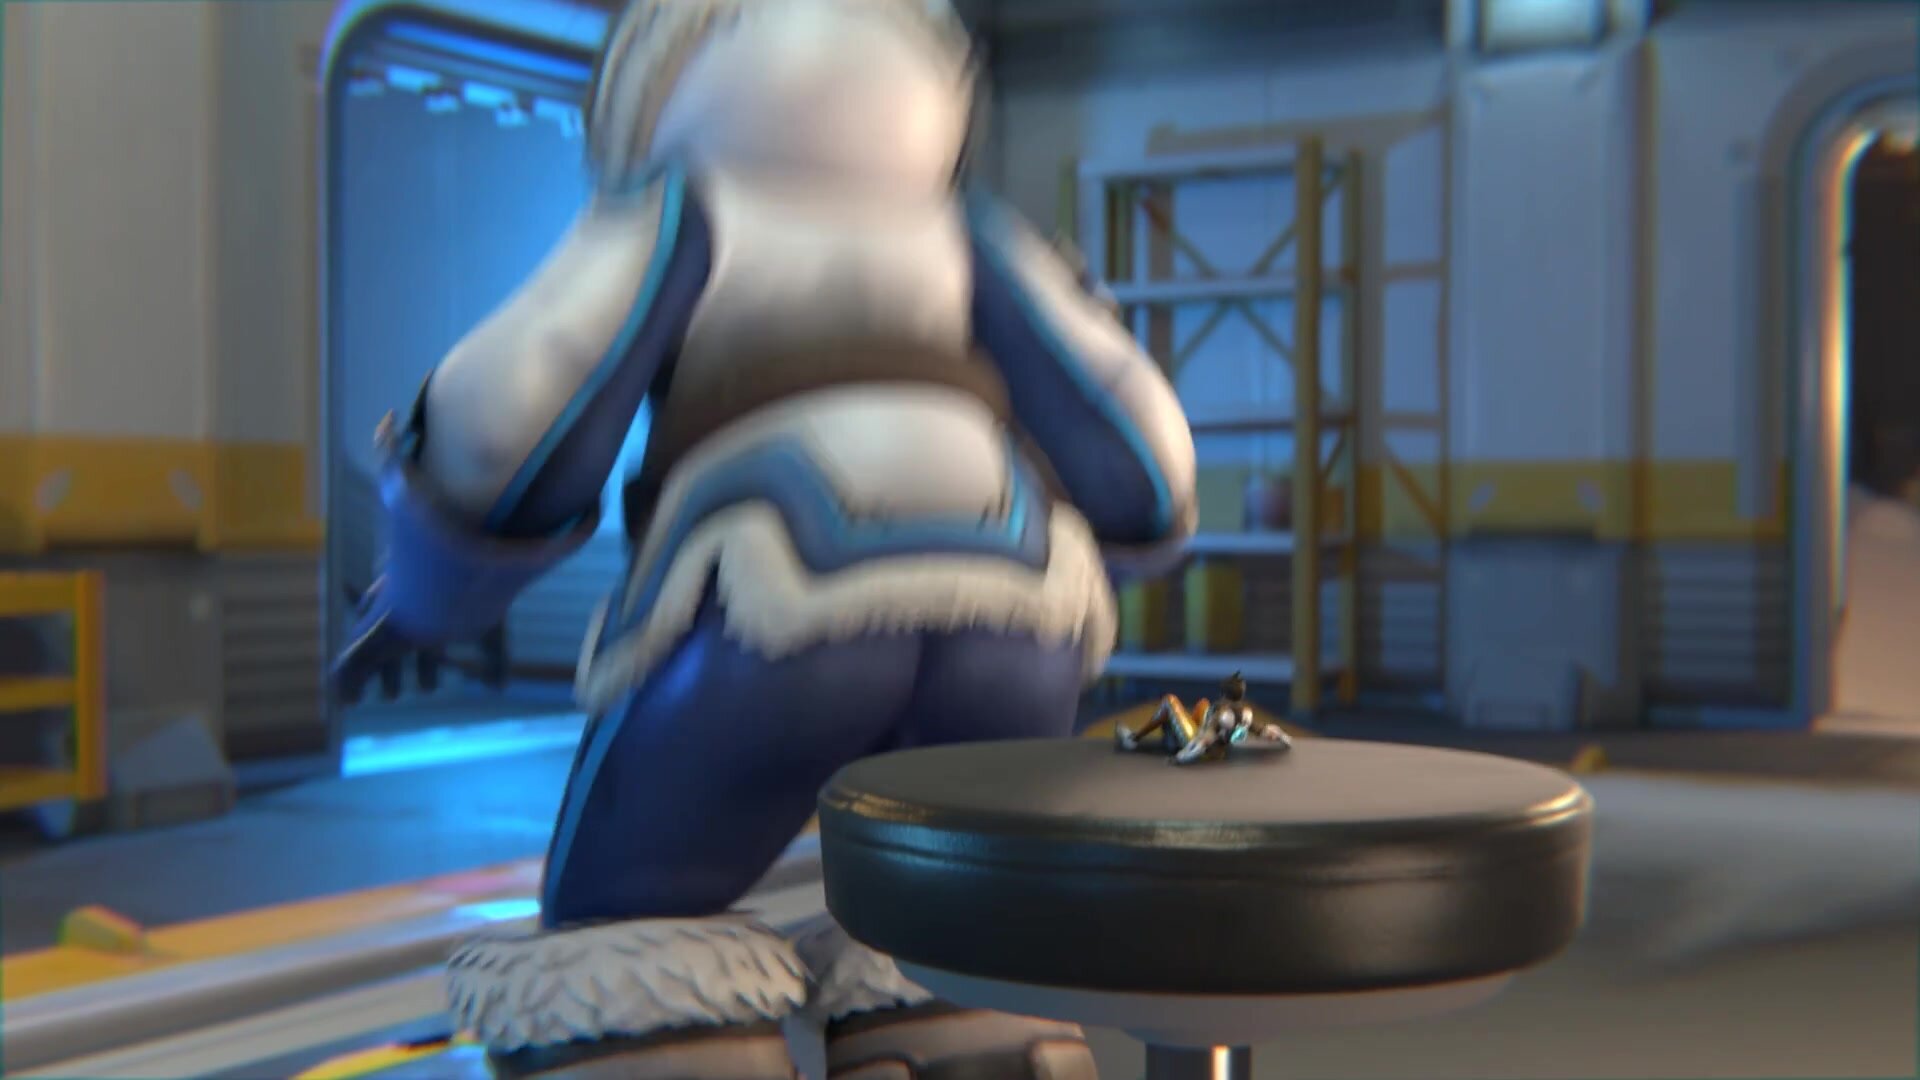 Mei squashes Tracer